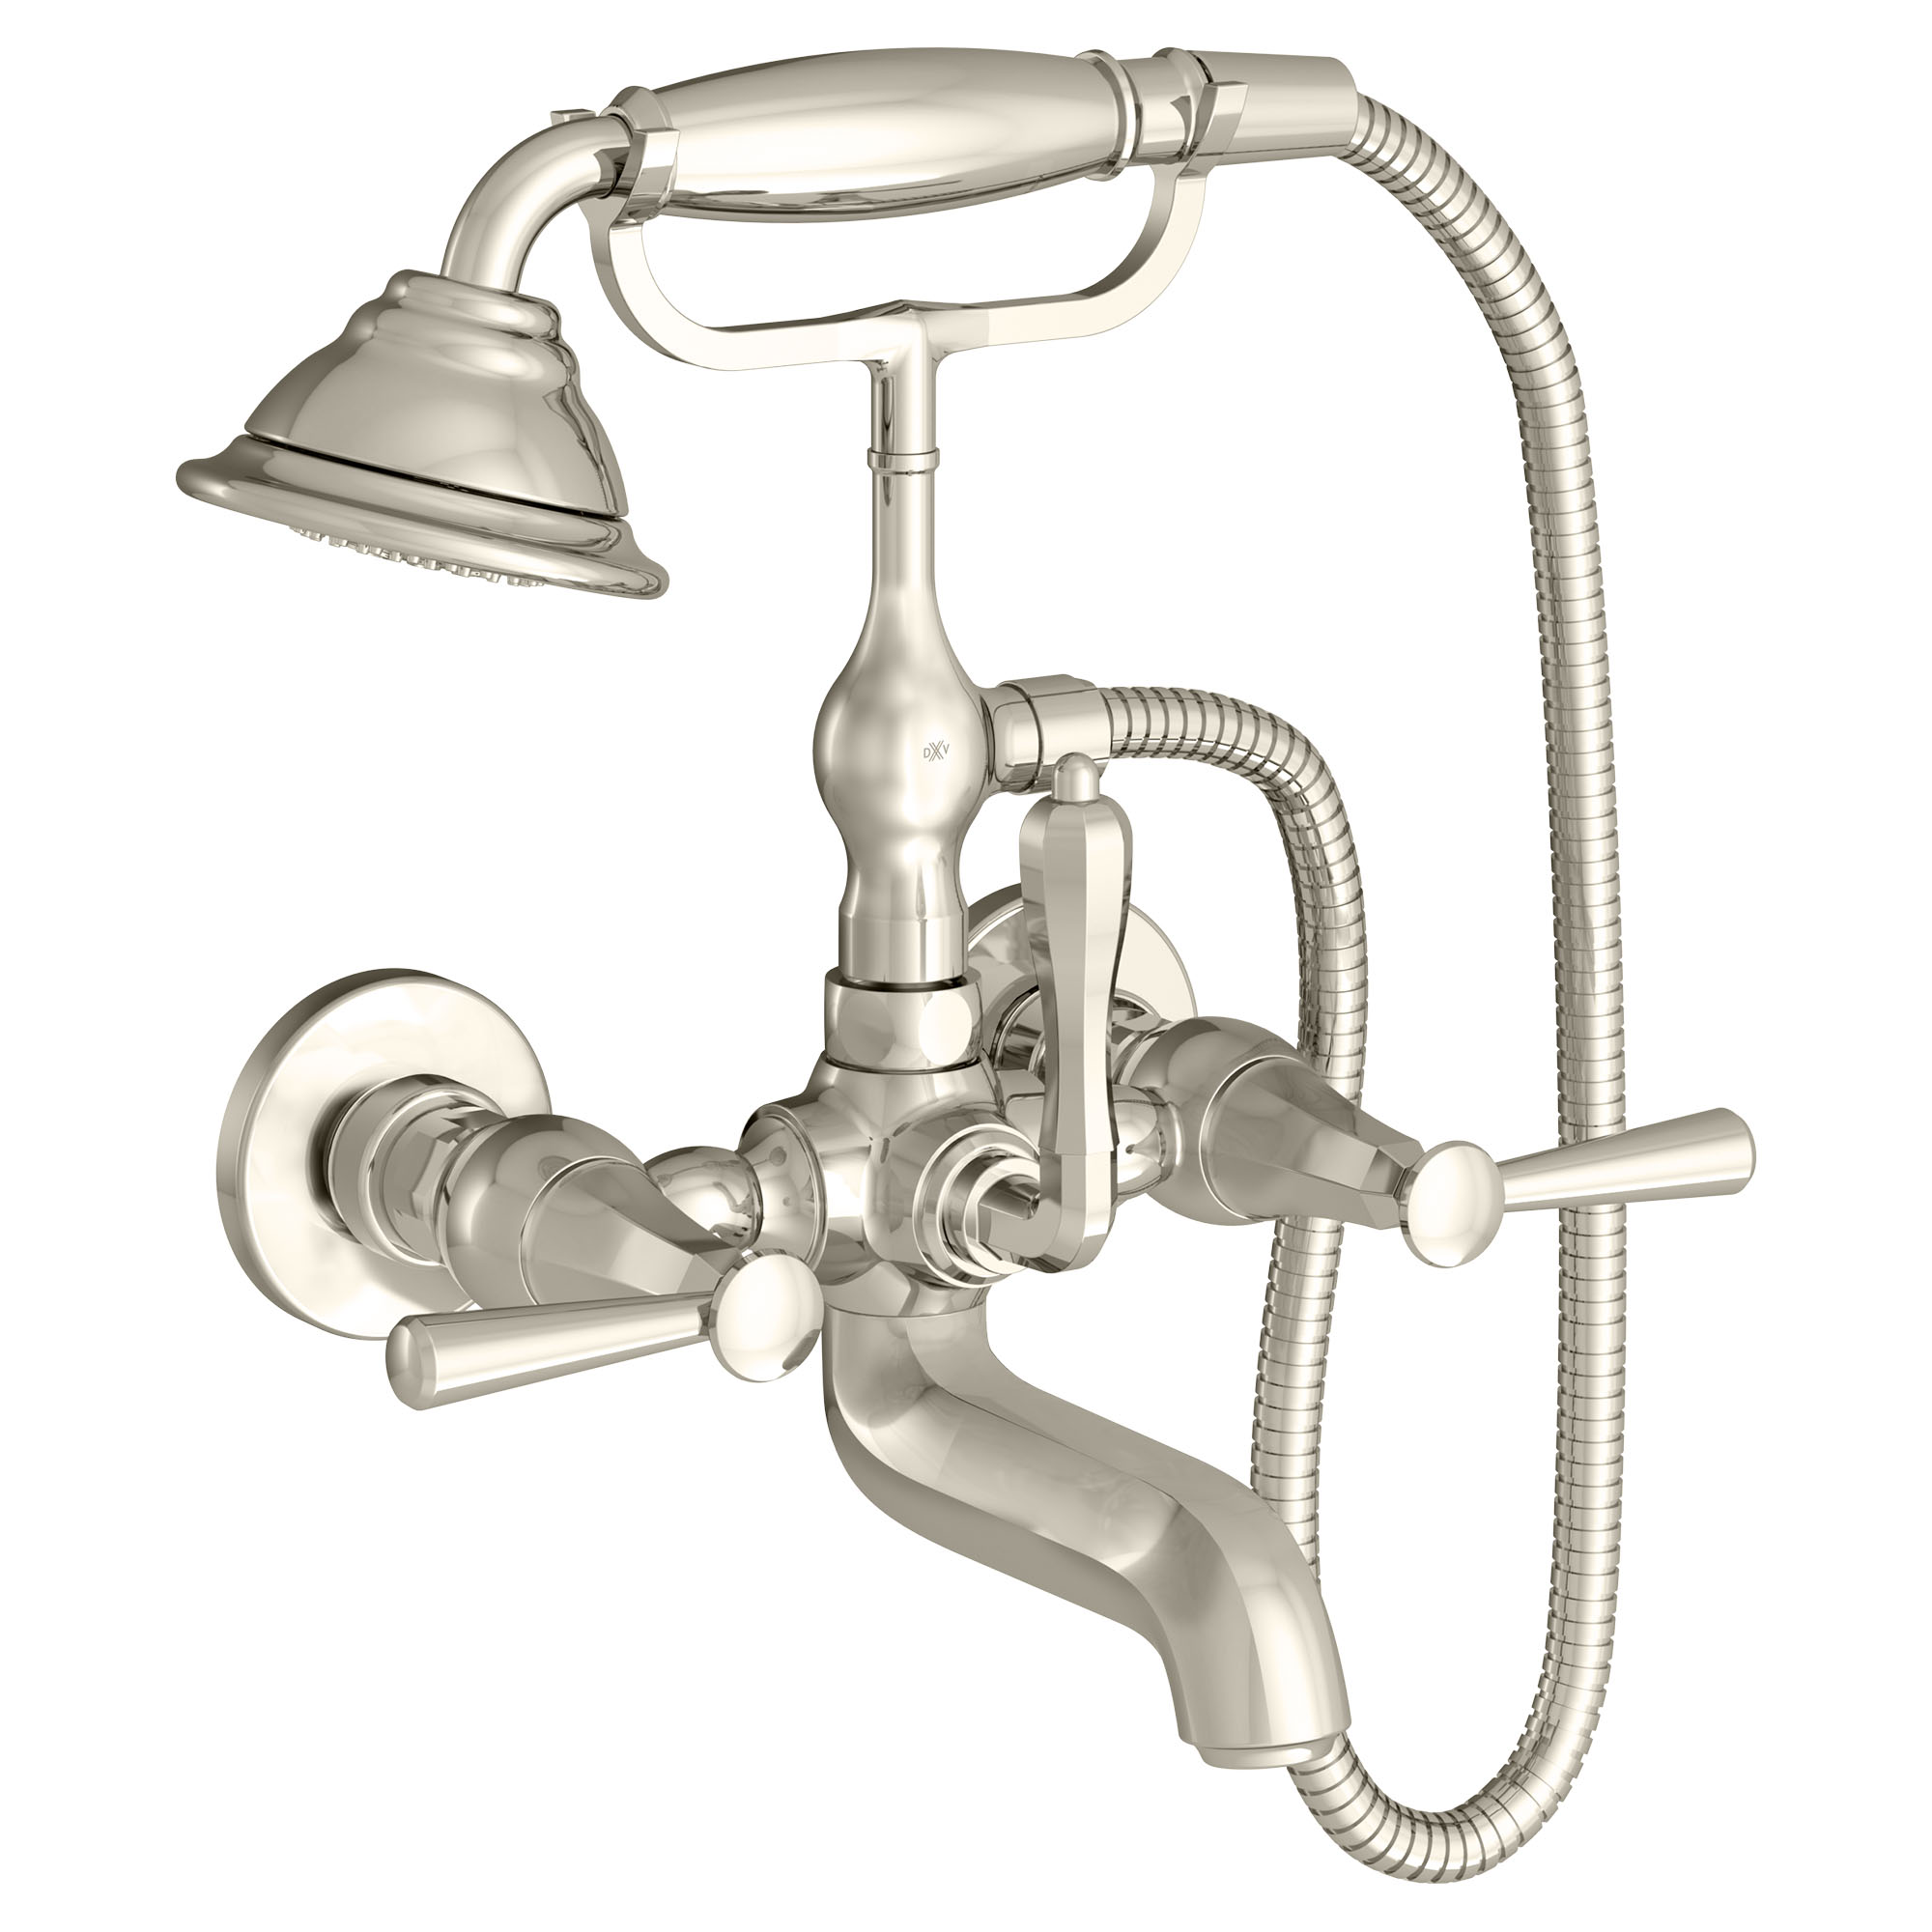 FITZGERALD WALL MOUNT TUB FILLER WITH HAND SHOWER